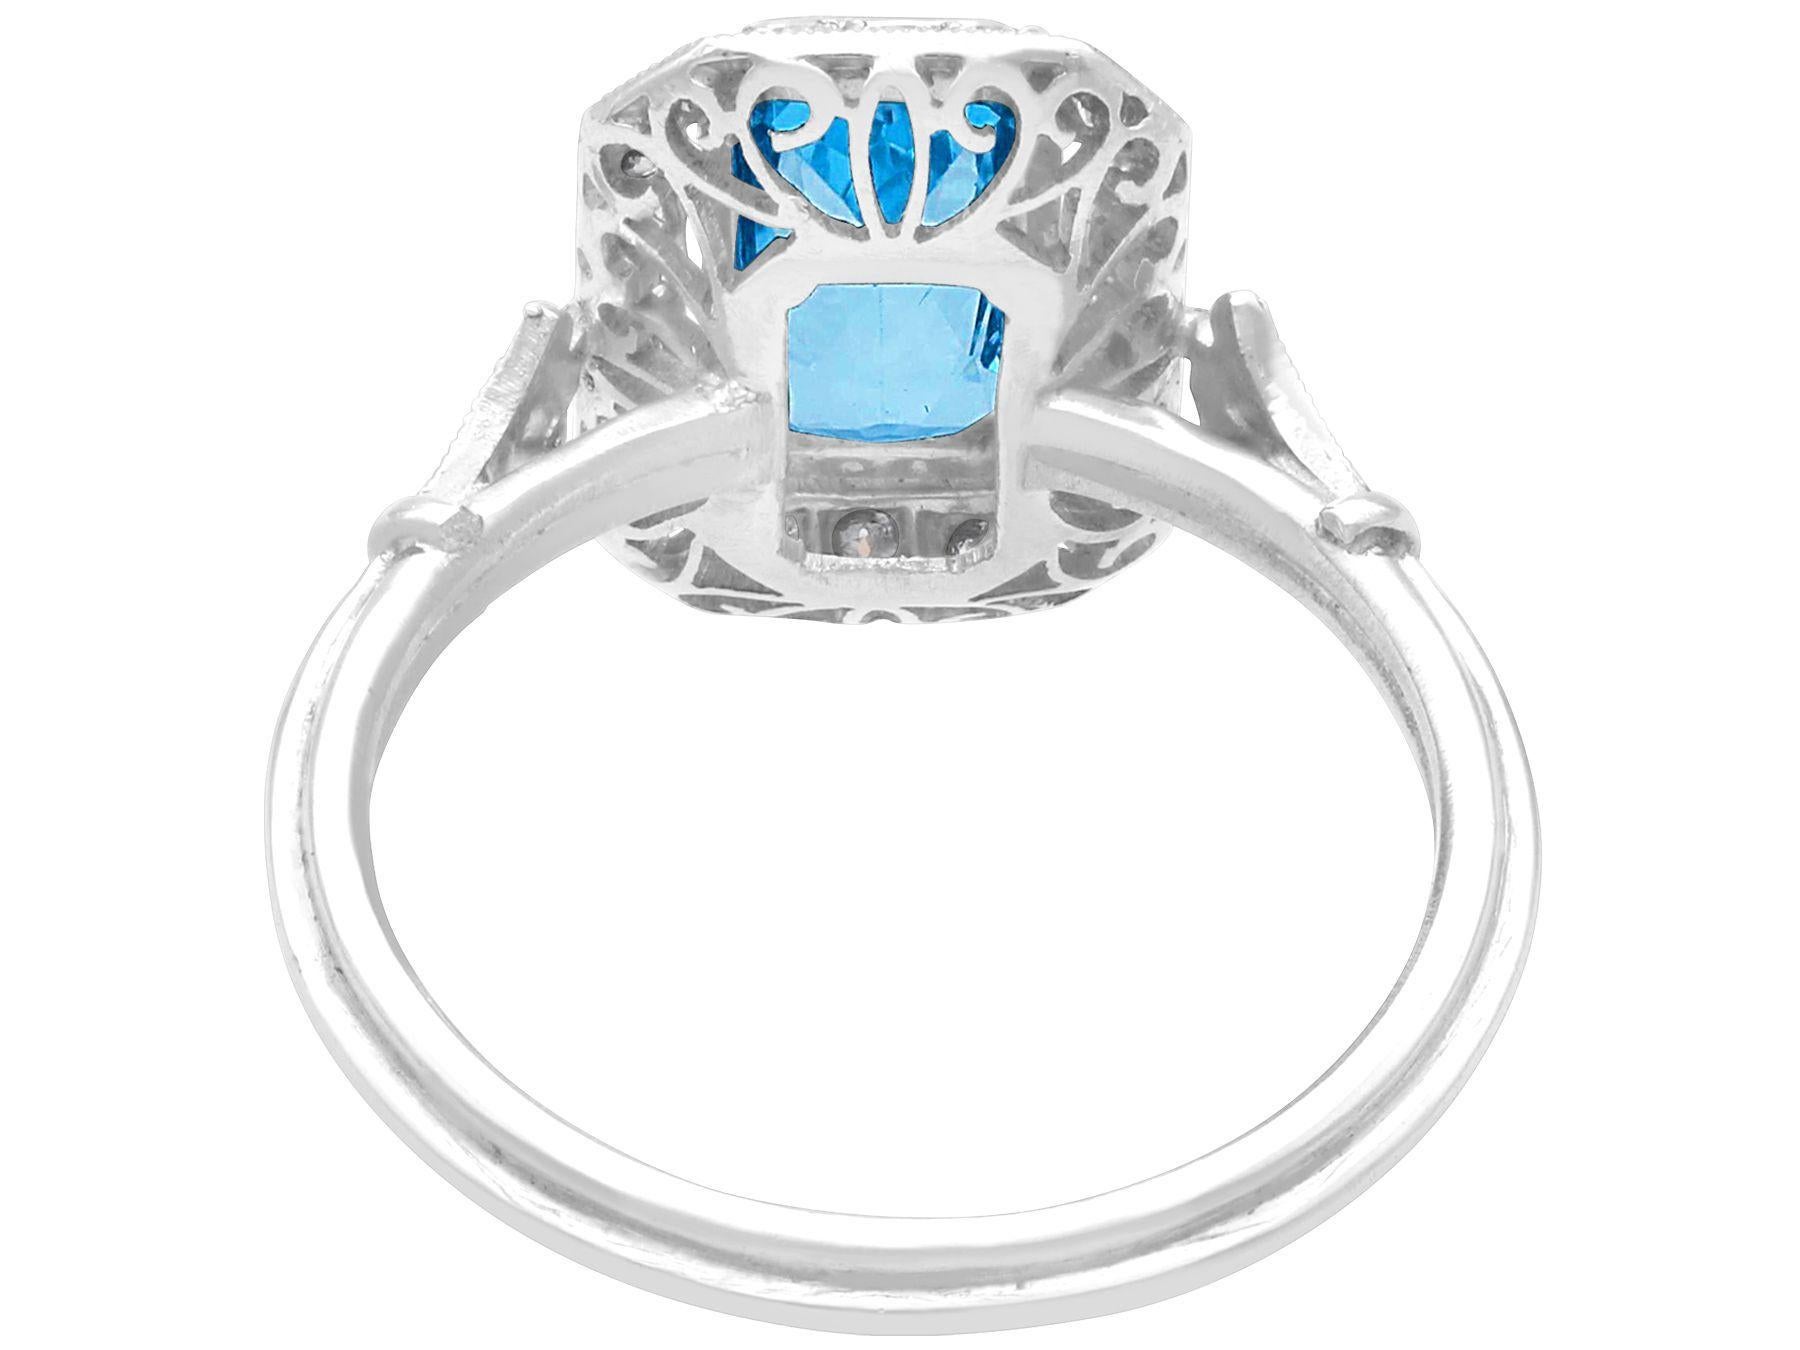 1.16 Carat Aquamarine and Diamond Platinum Cocktail Ring In Excellent Condition For Sale In Jesmond, Newcastle Upon Tyne